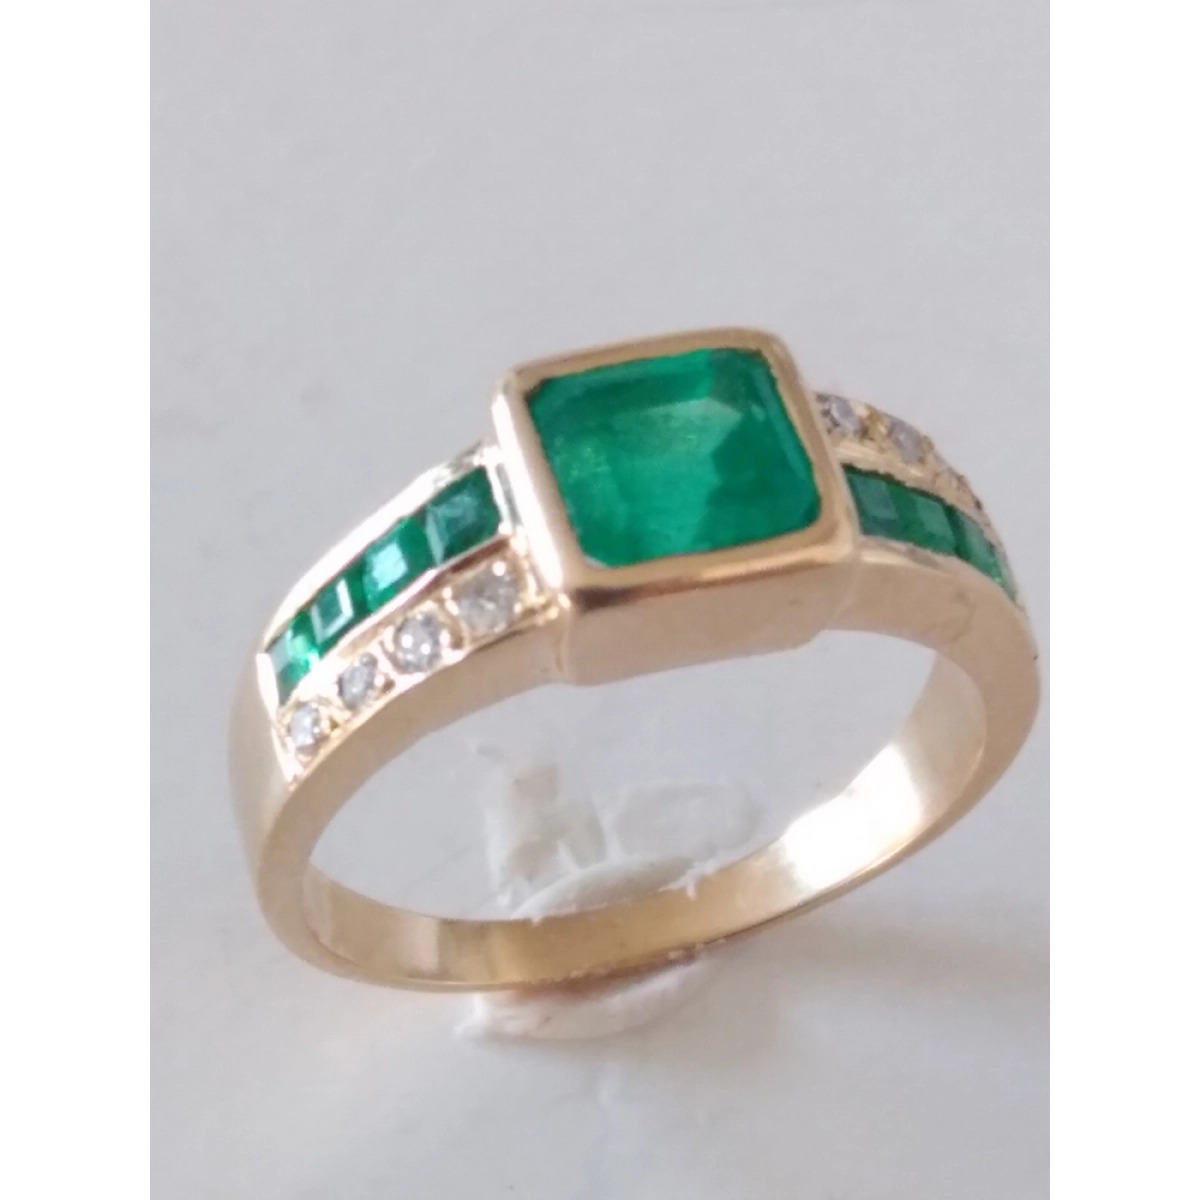 RING EMERALD GOLDEN AND BRIGHT